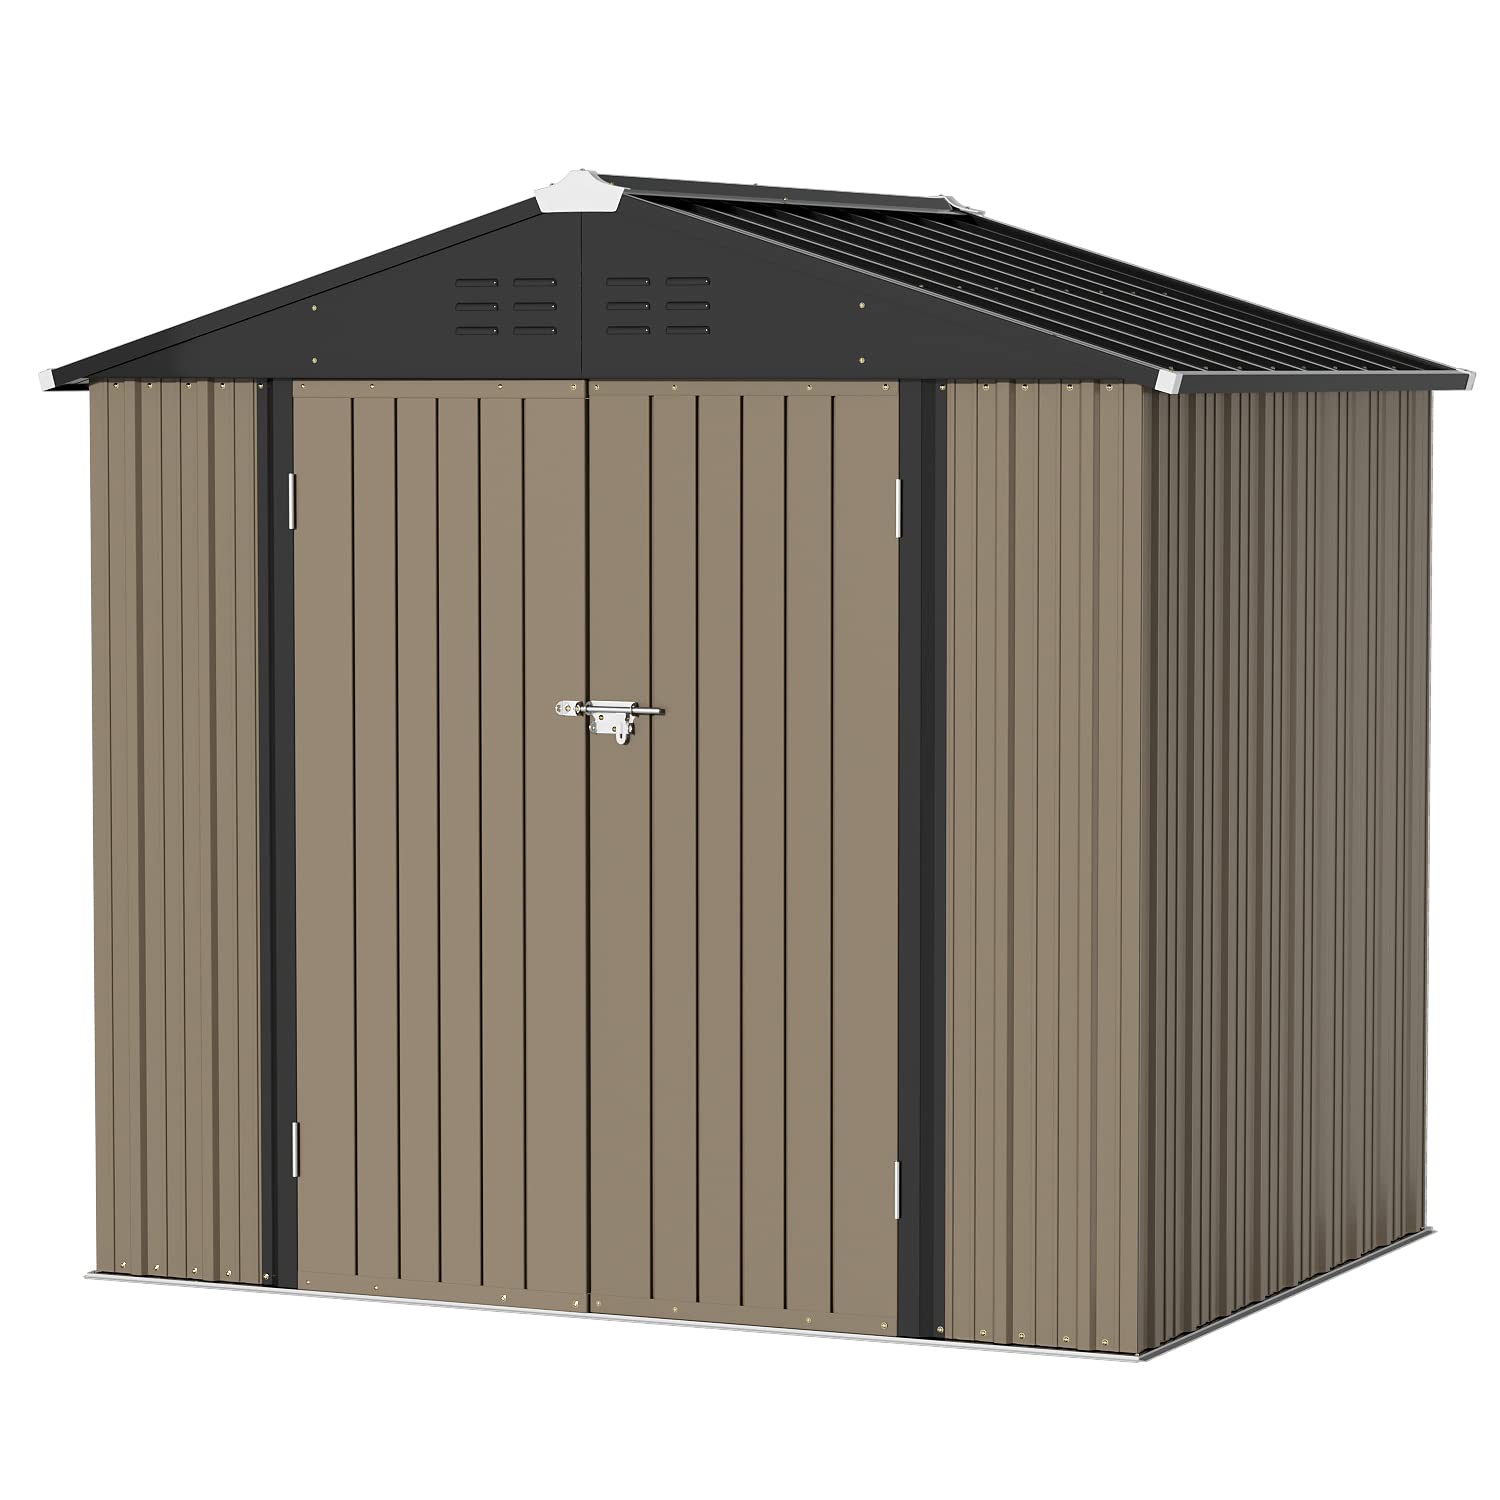 Greesum Metal Outdoor Storage Shed 8Ft X 6Ft, Steel Utility Tool Shed Storage House With Door & Lock, Metal Sheds Outdoor Storag